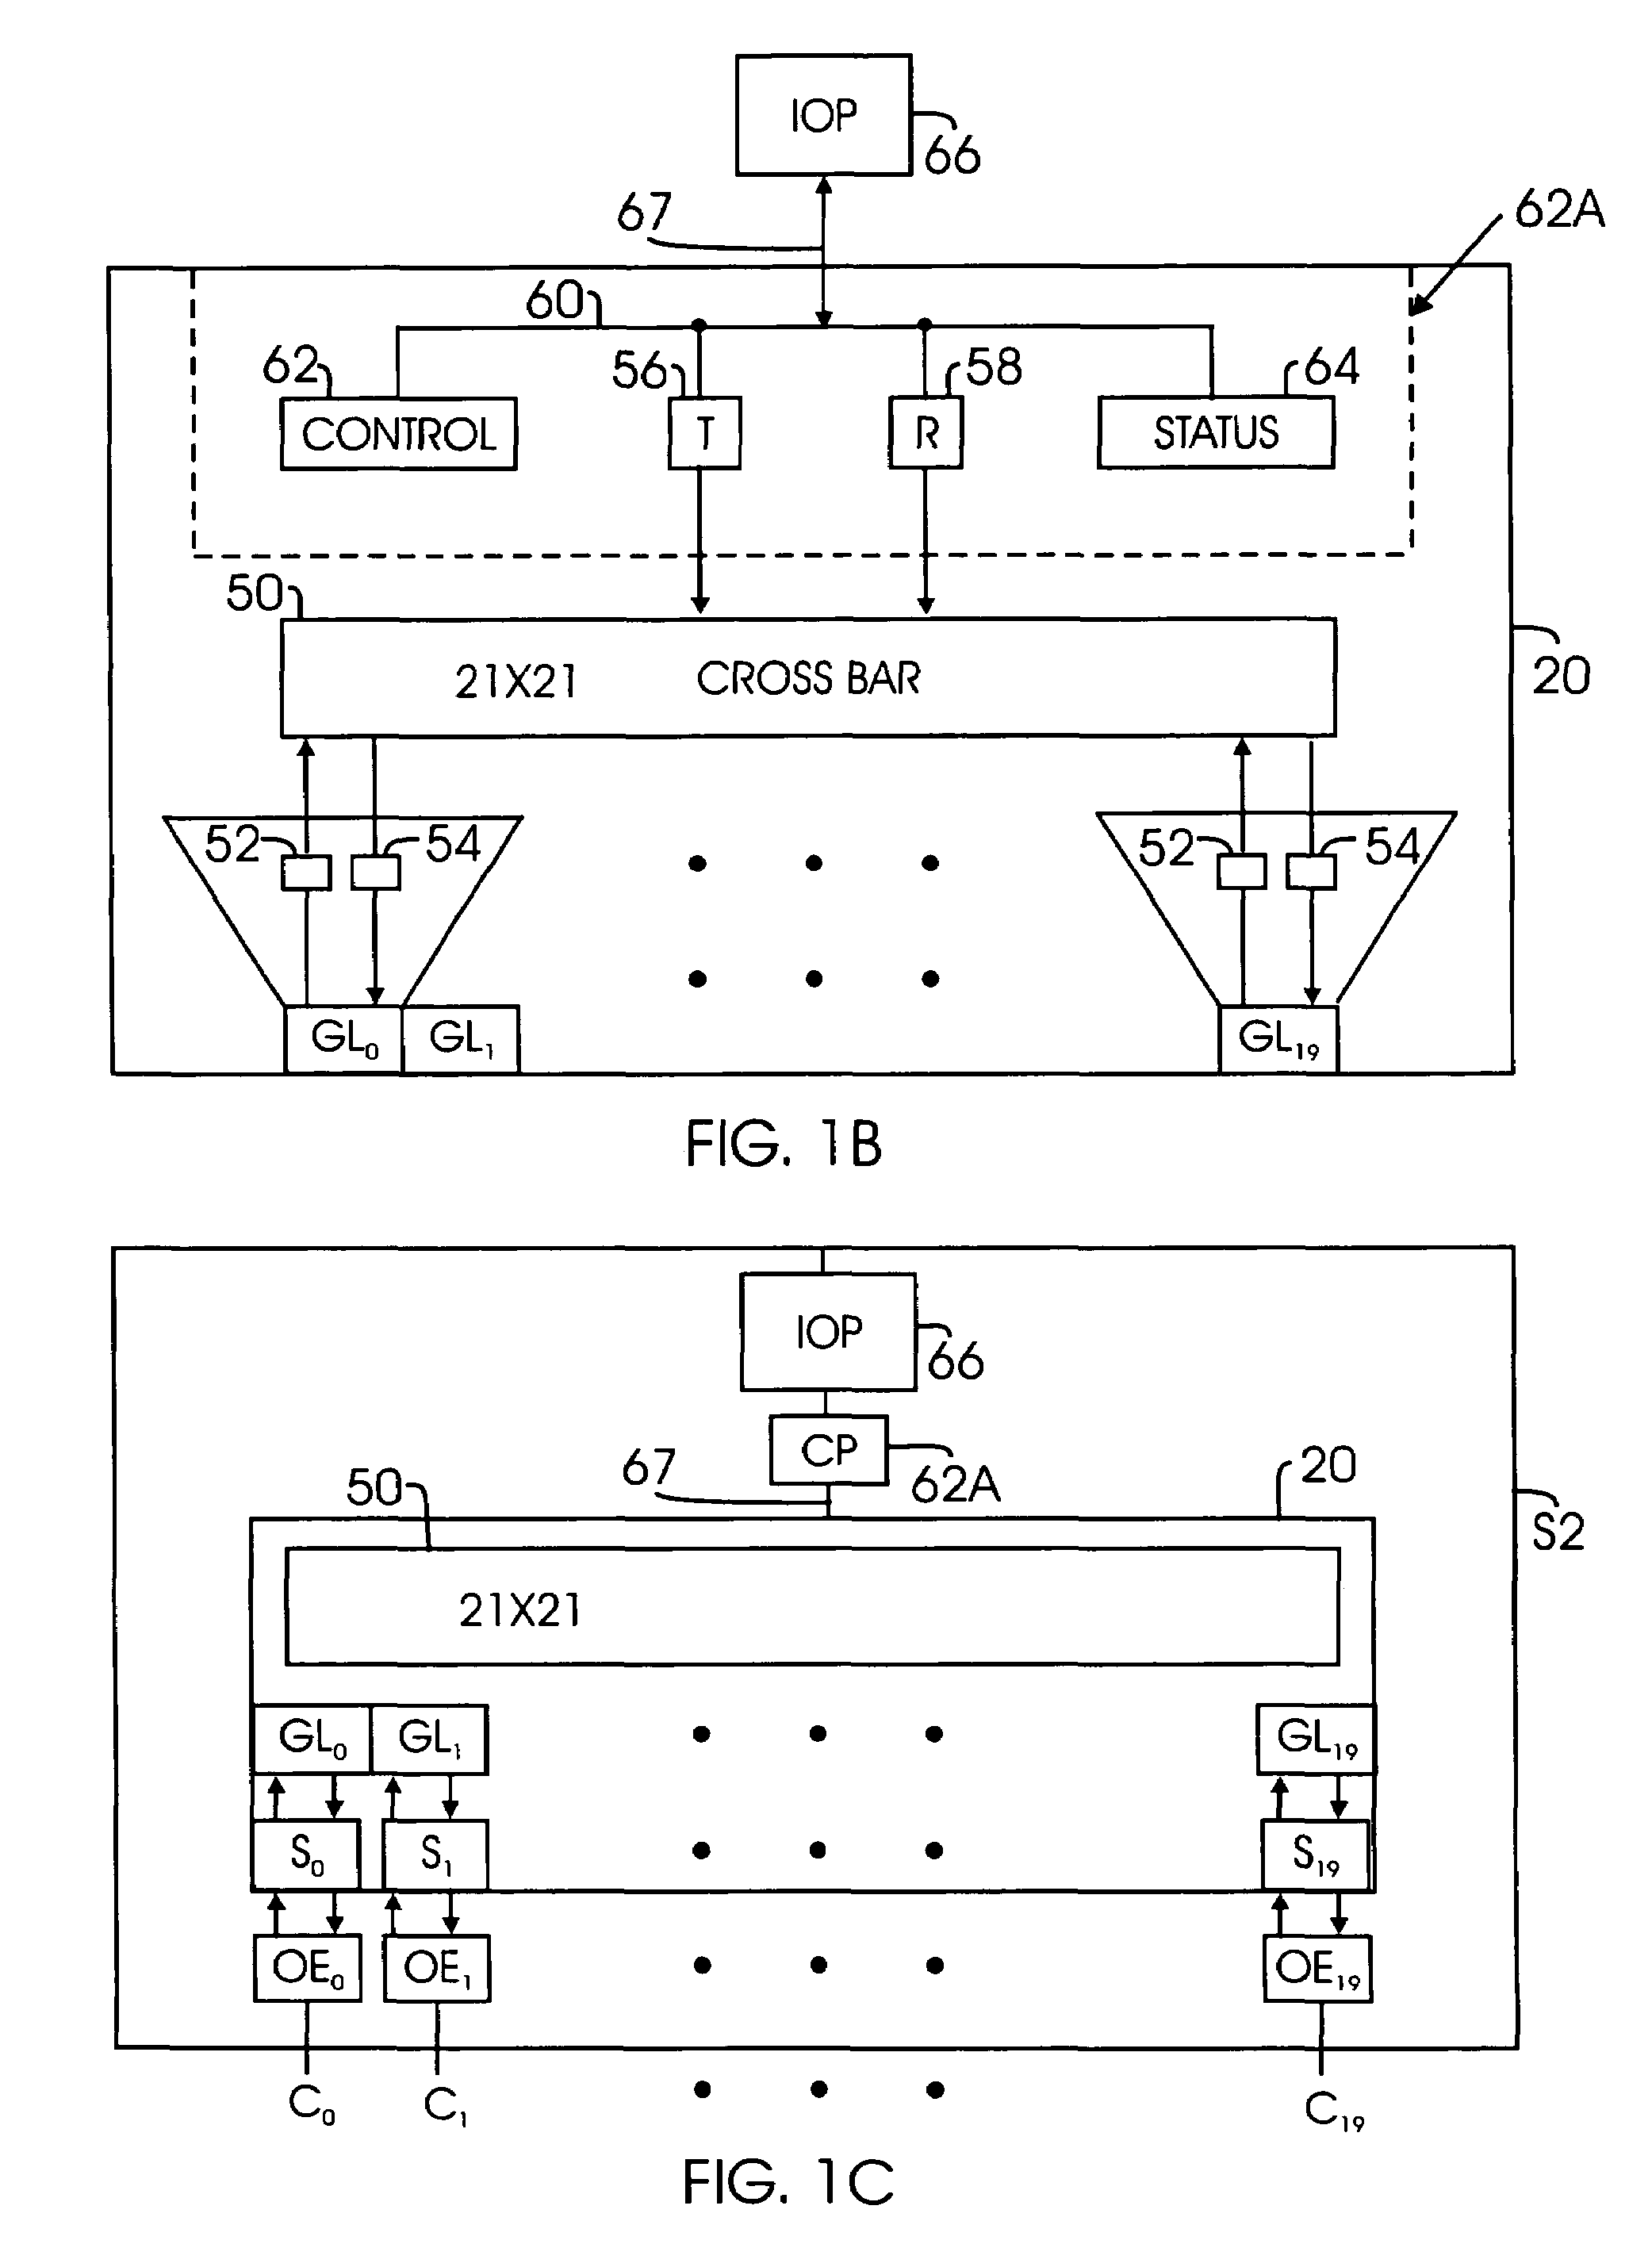 Method and system for inter-fabric routing